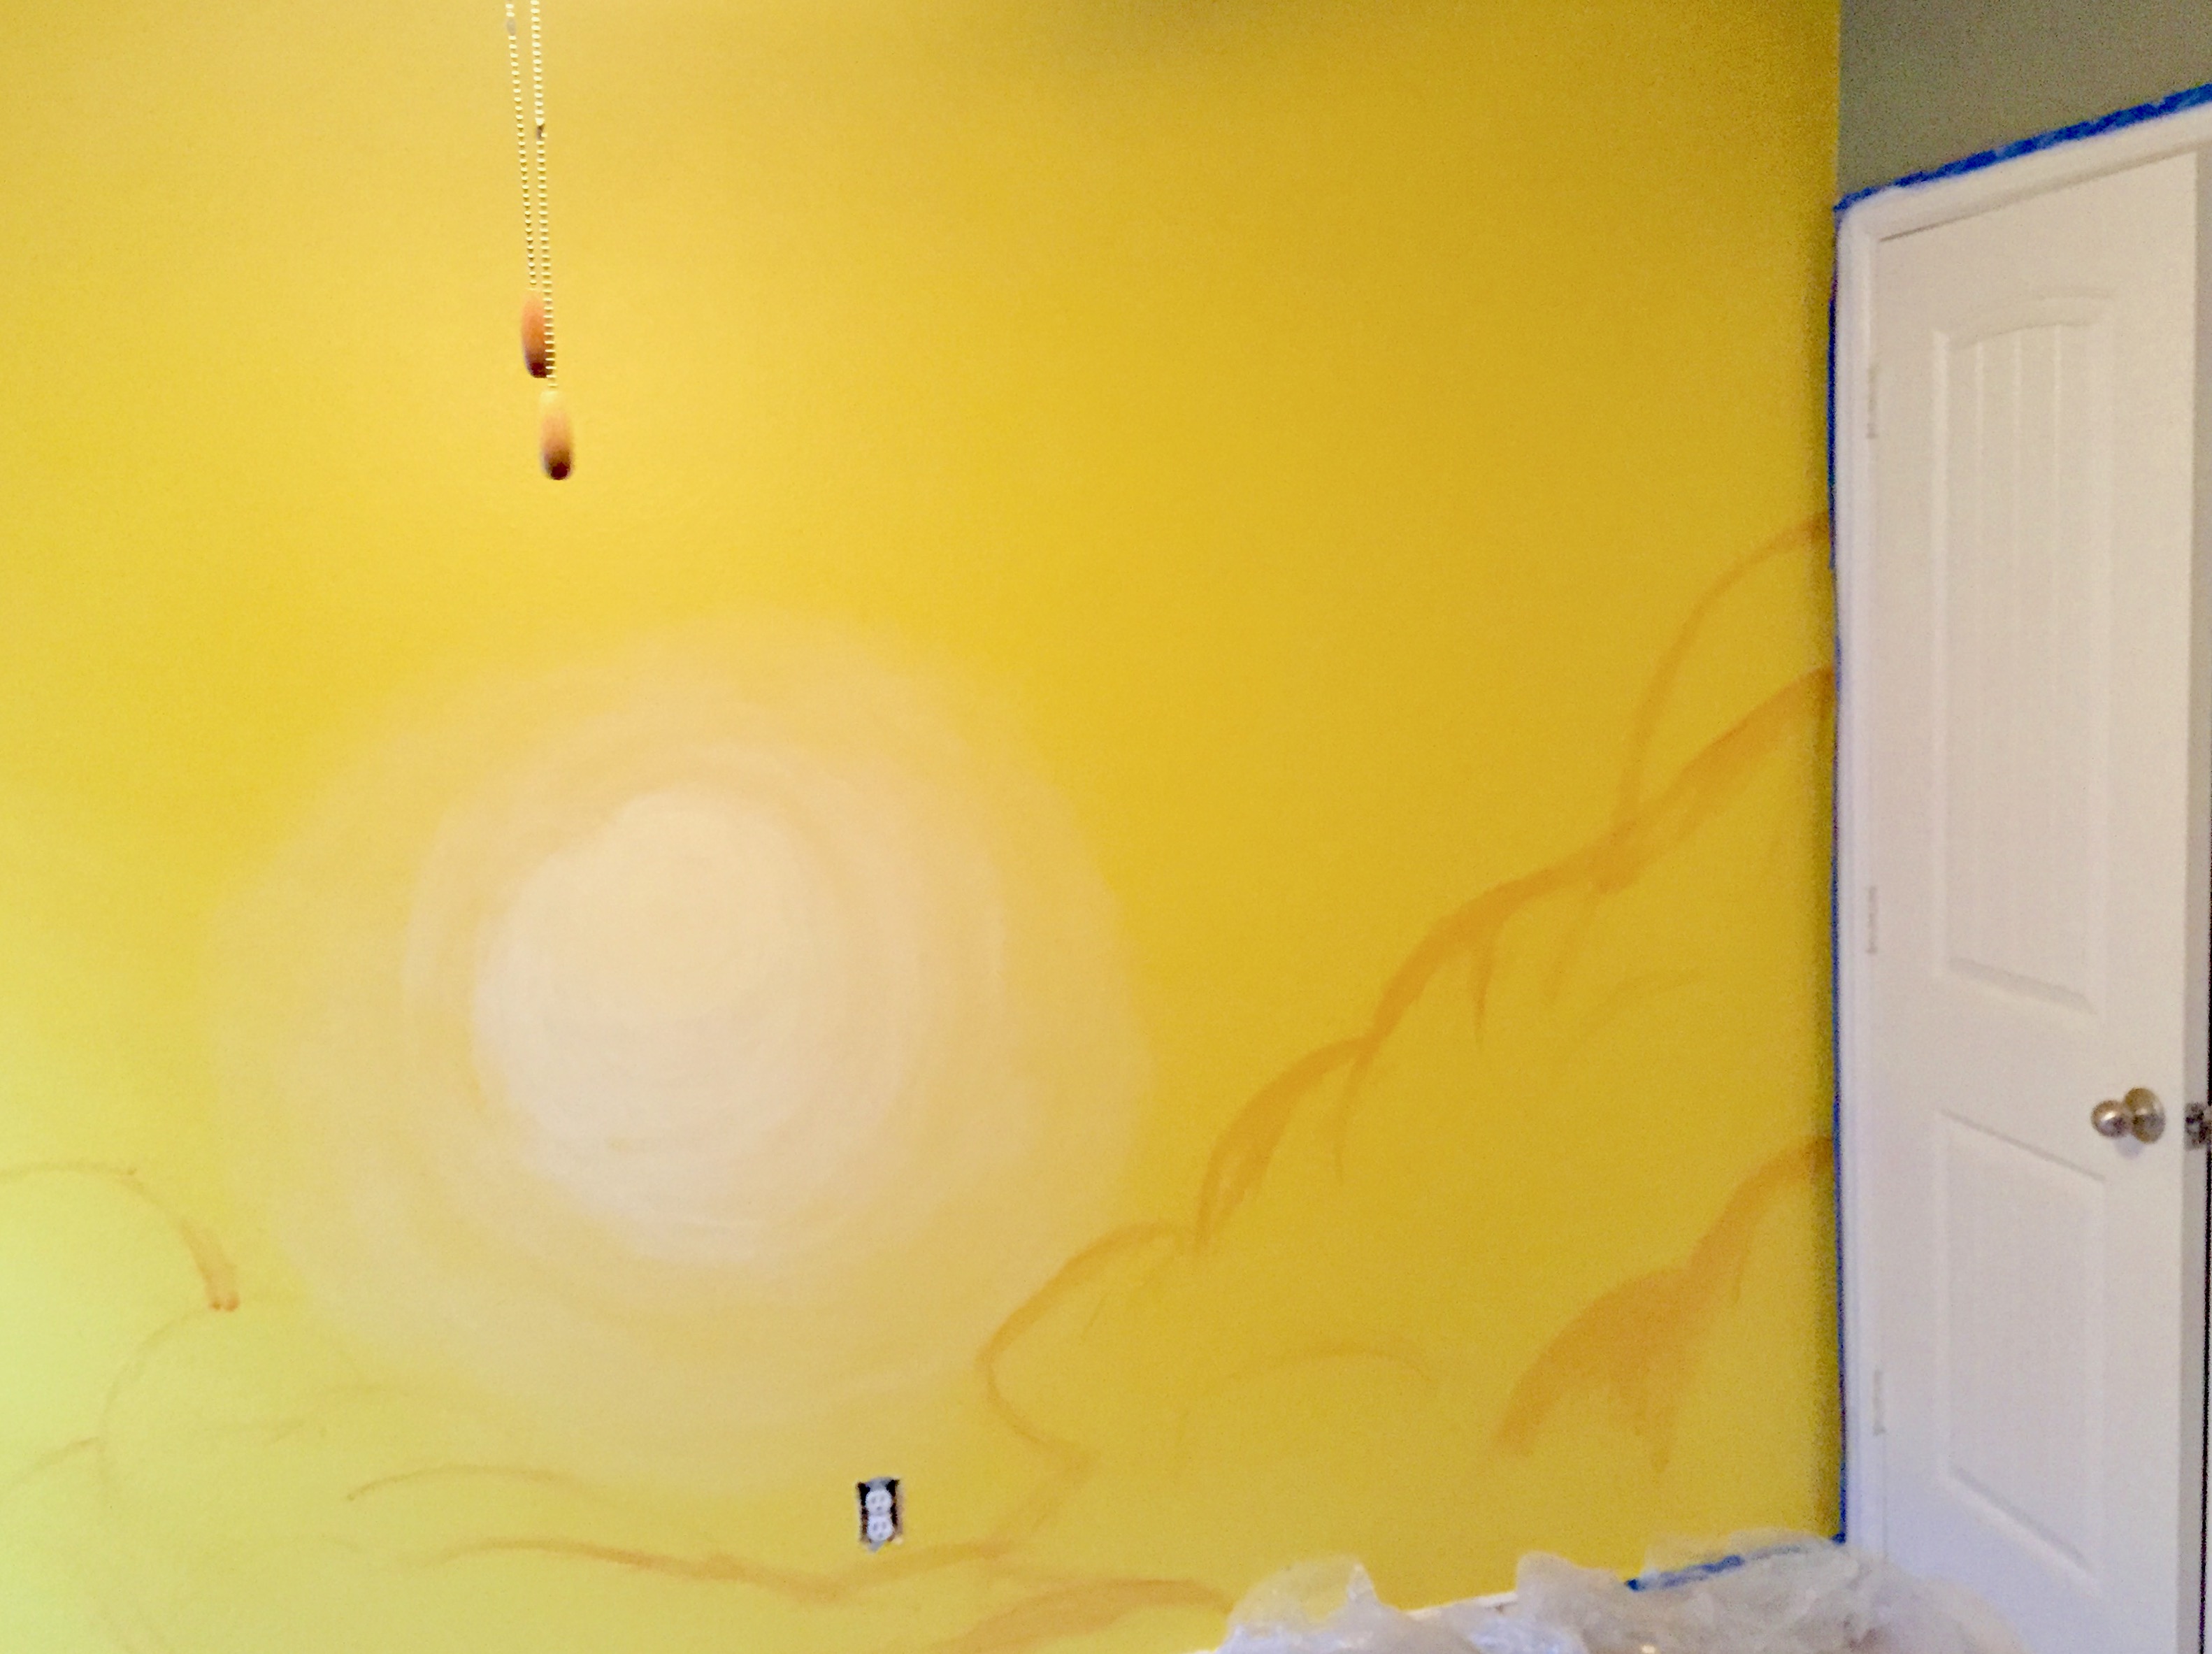 A painted pale yellow circular sun and the outline of orange clouds on a yellow wall